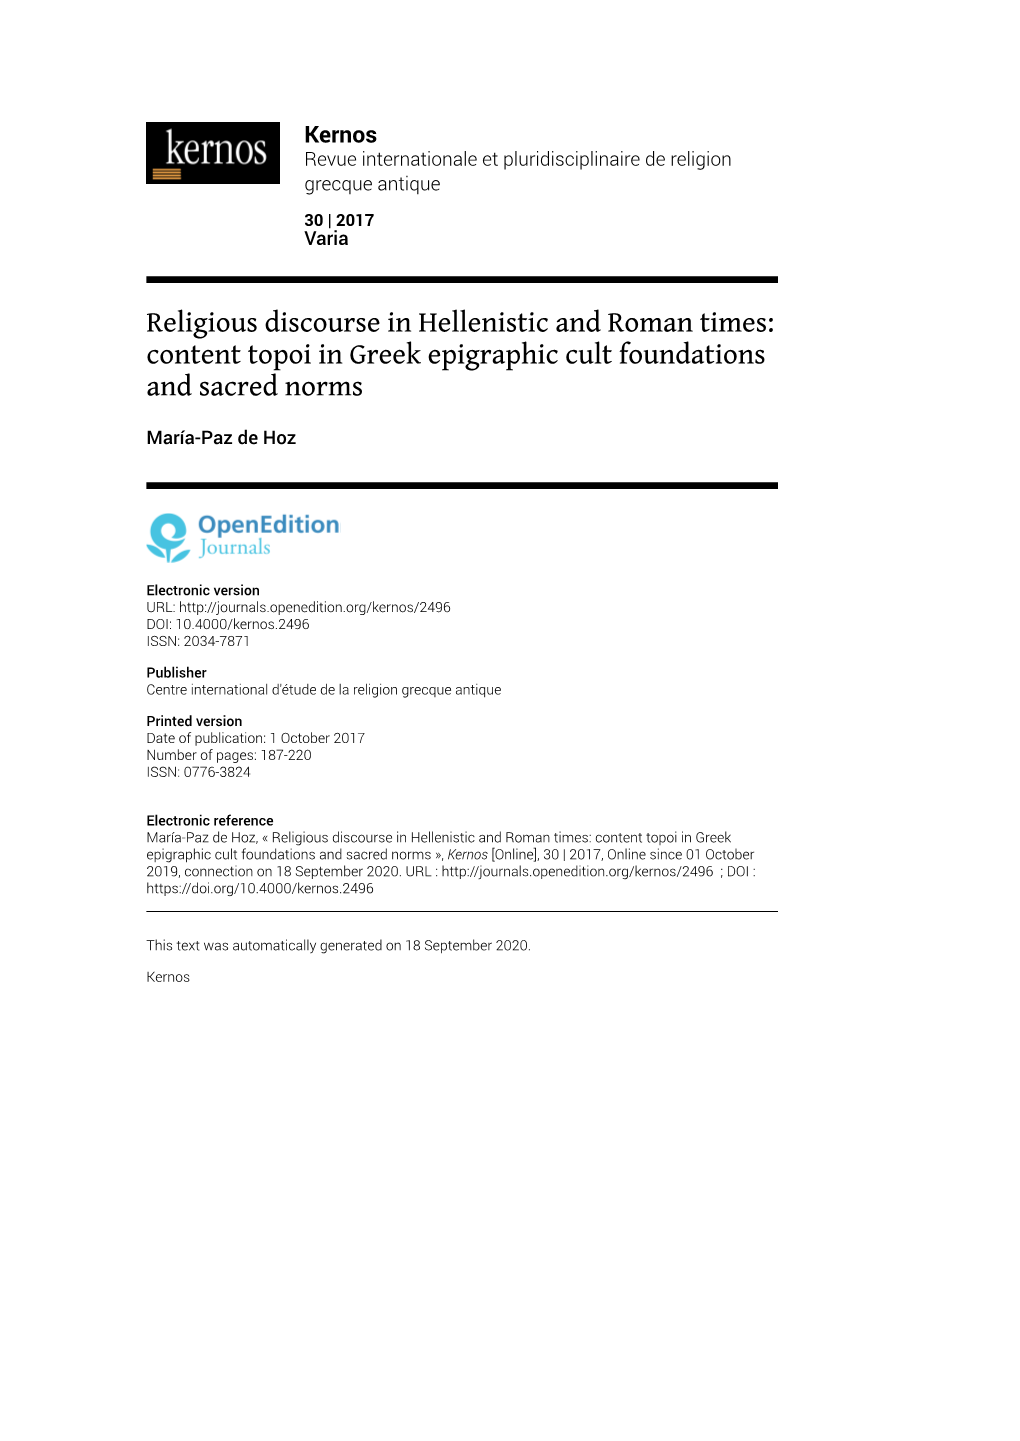 Religious Discourse in Hellenistic and Roman Times: Content Topoi in Greek Epigraphic Cult Foundations and Sacred Norms